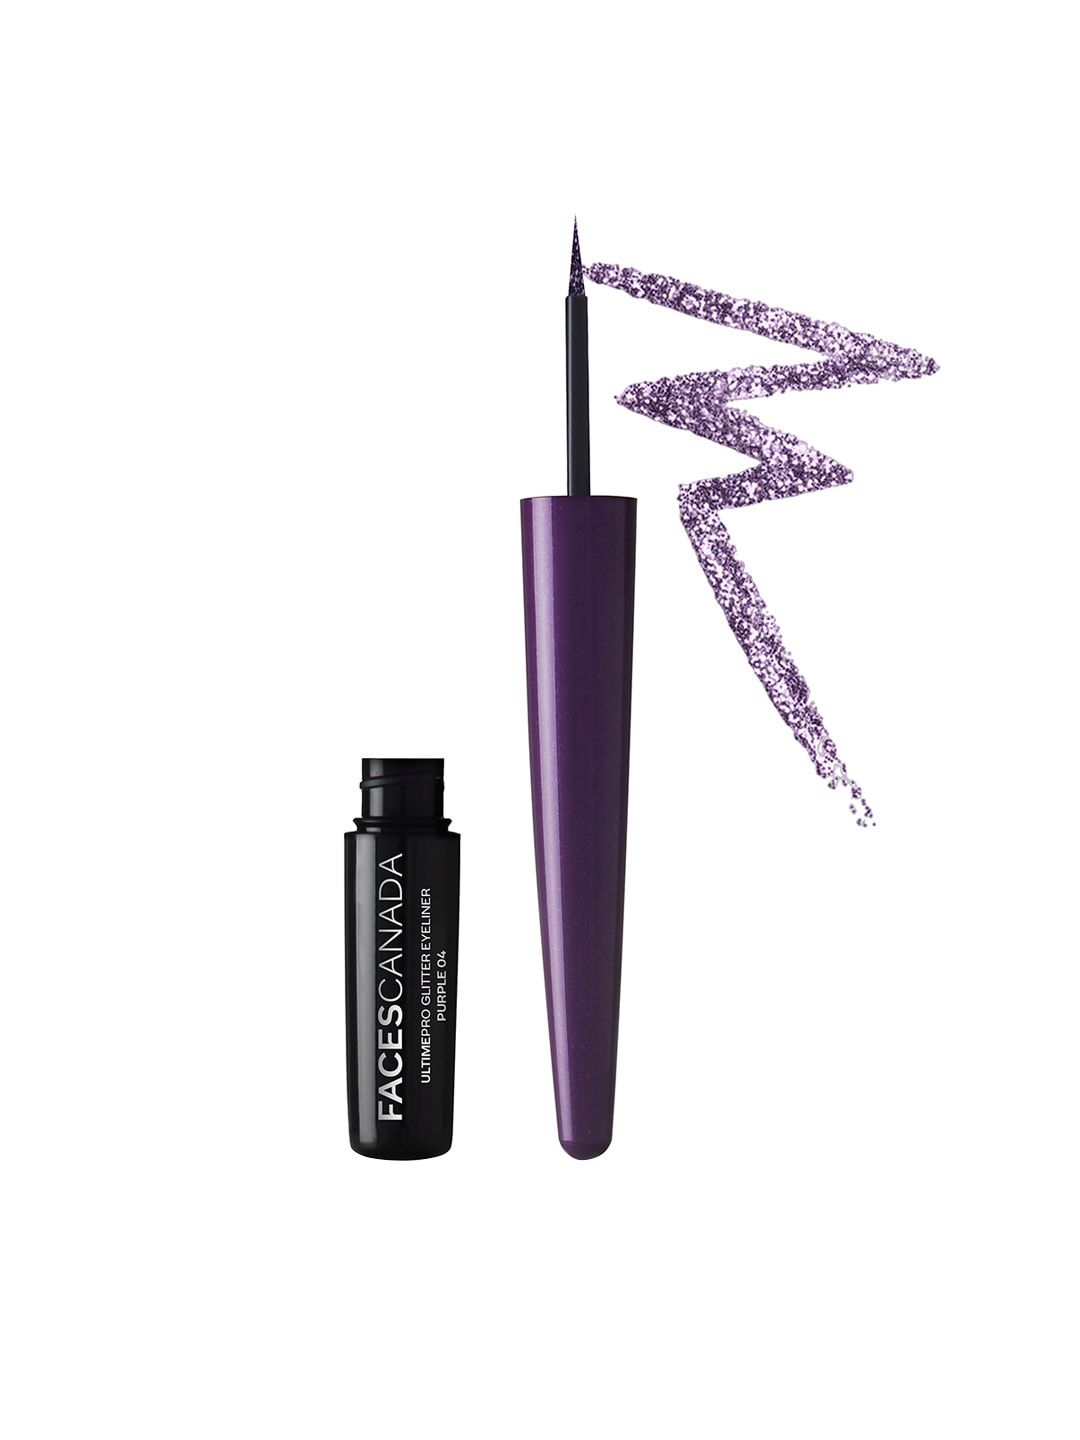 FACES CANADA Ultime Pro Glitter Eyeliner Purple 04 - 1.7ml Price in India